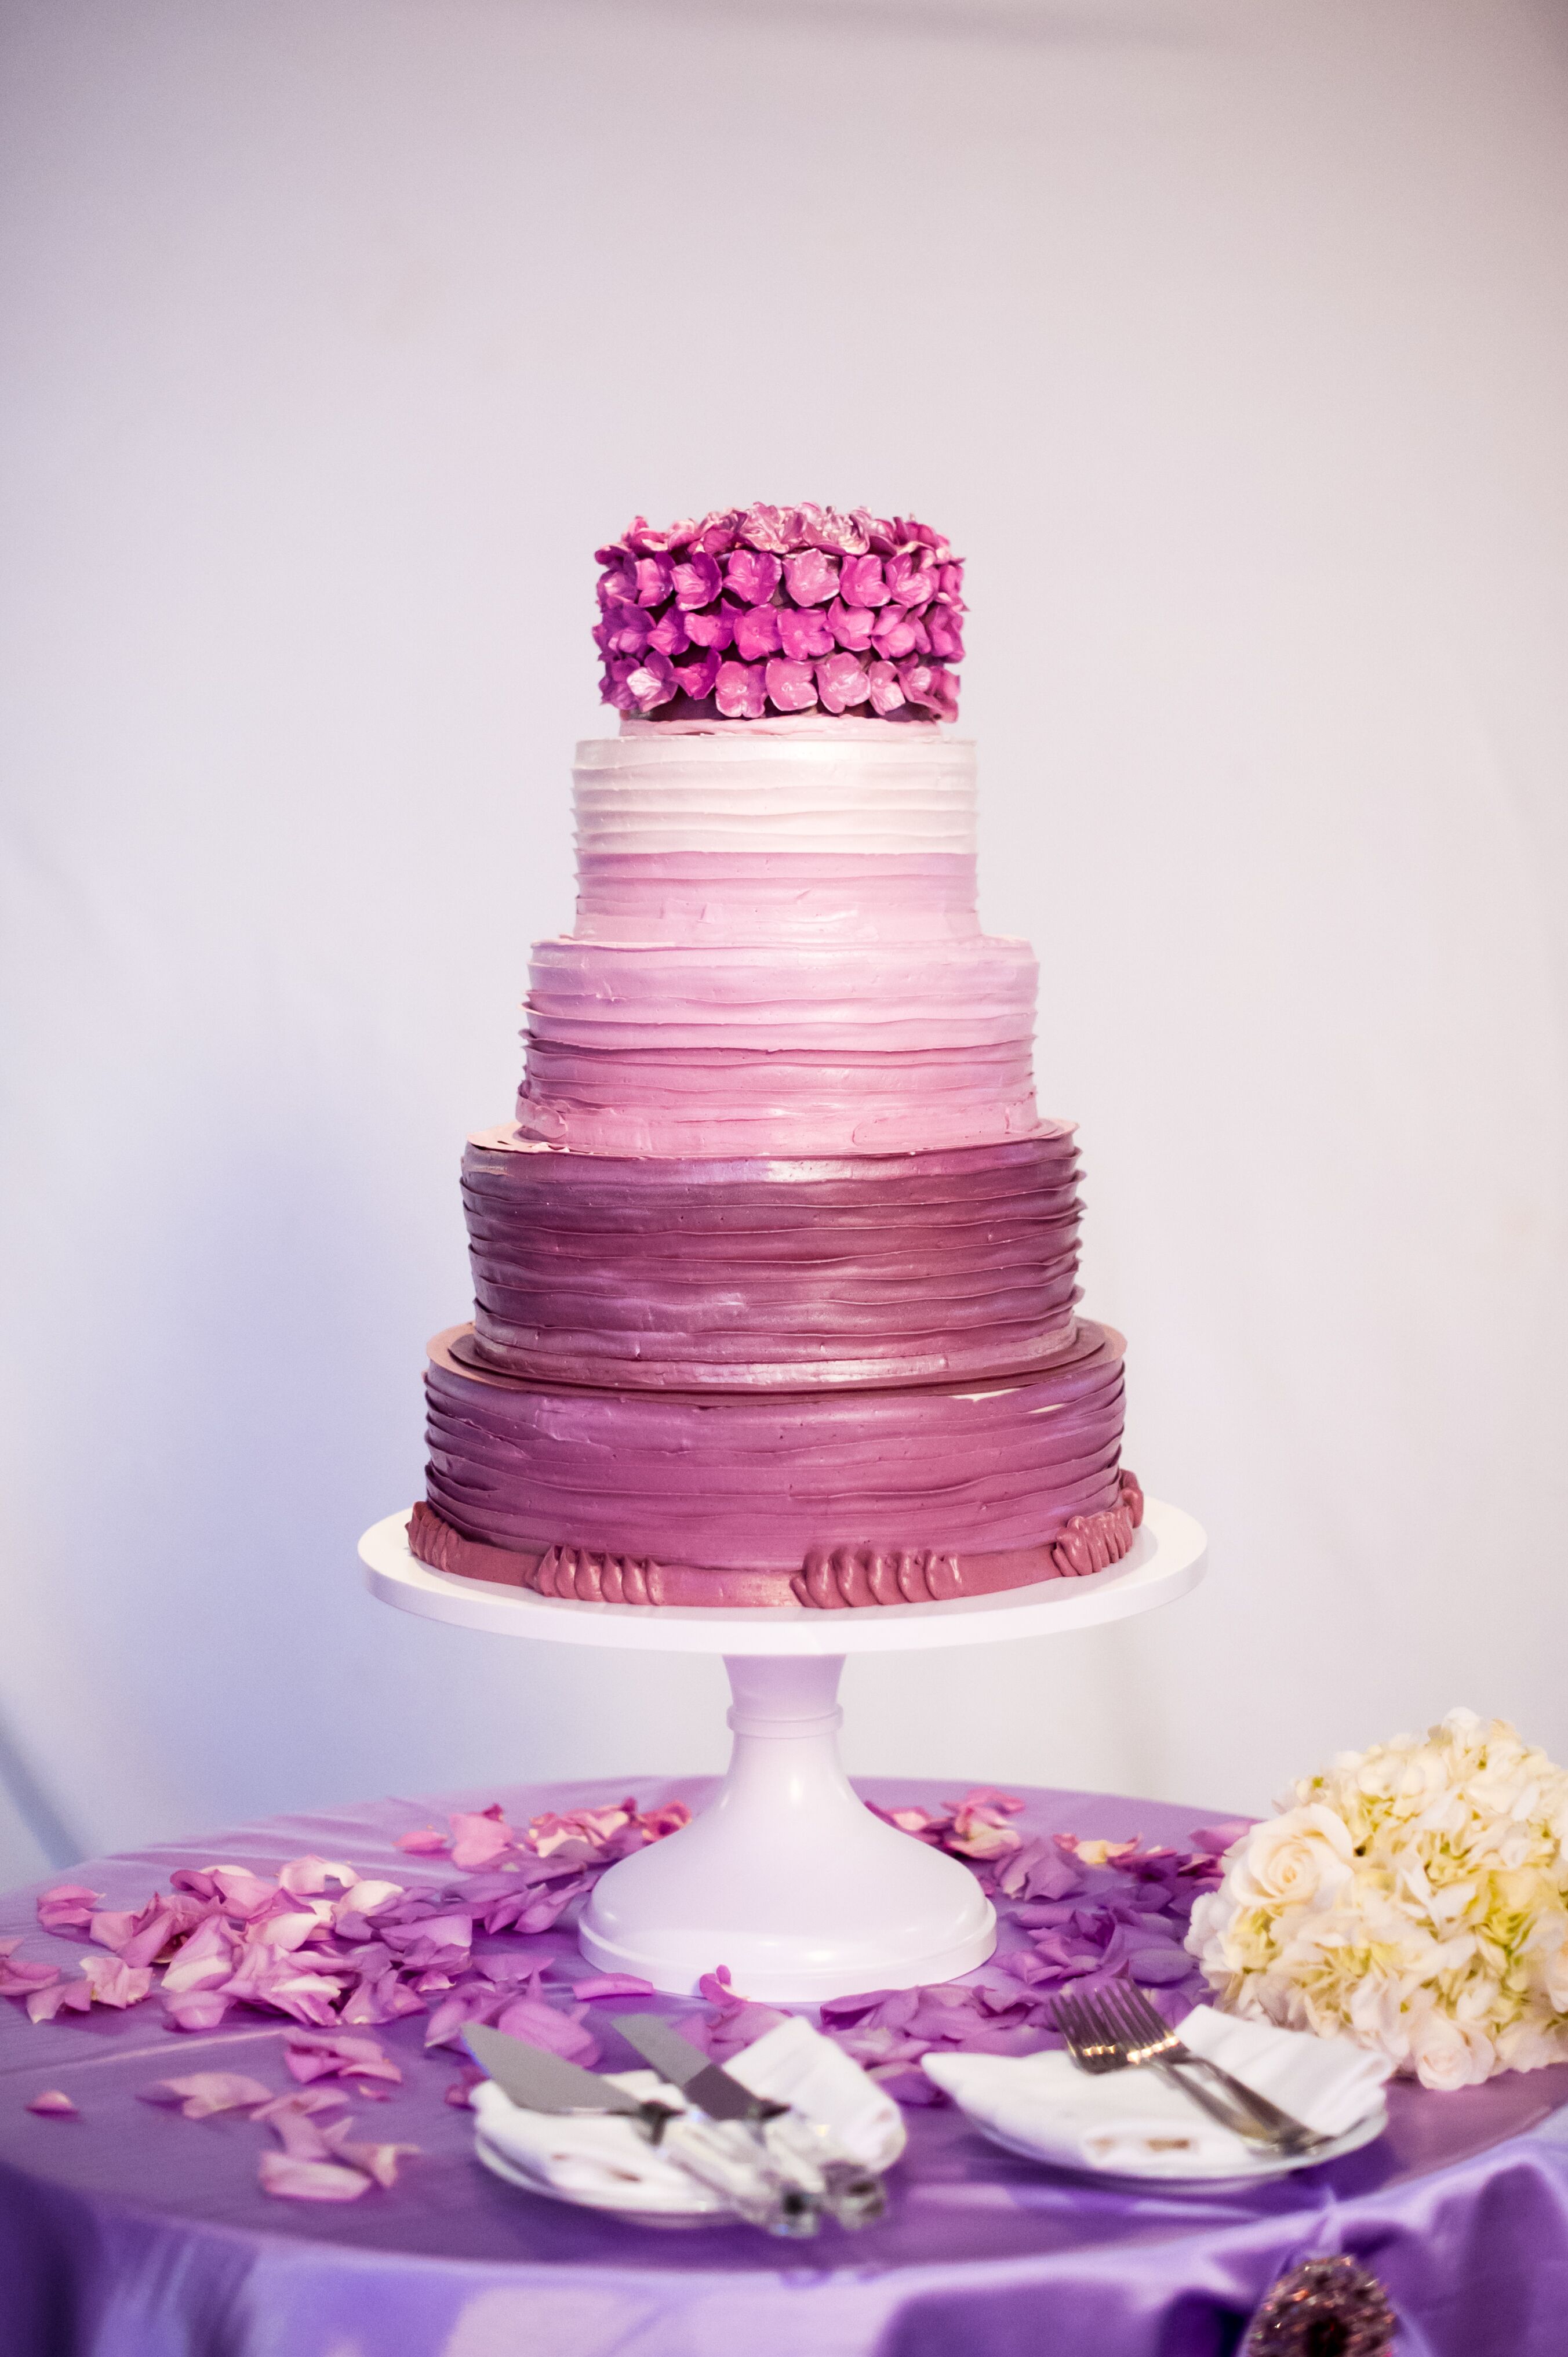 Check out this purple ombre cake with sugar flowers and see more inspiratio...